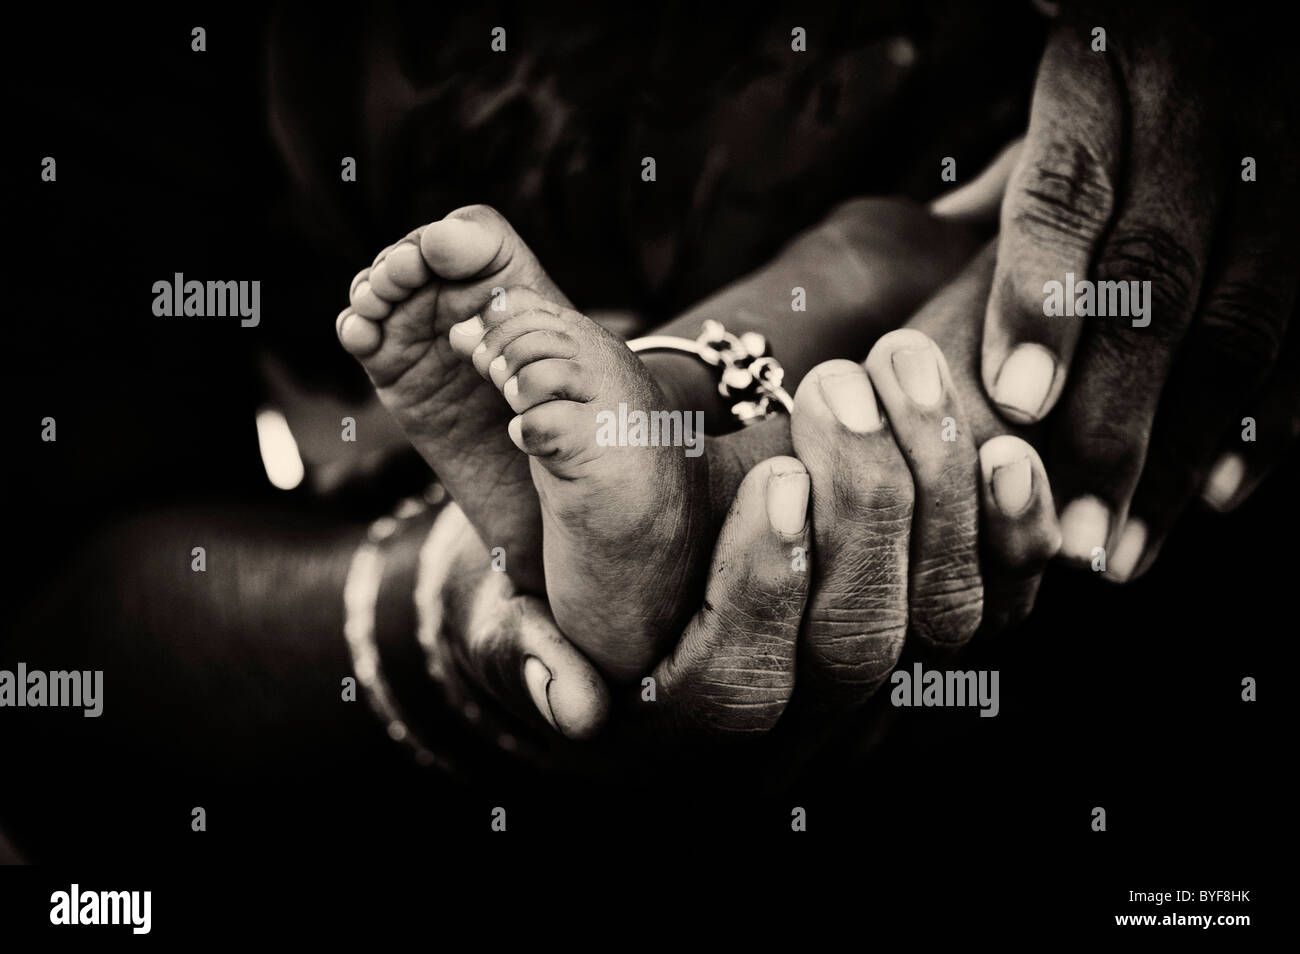 Indian grandmother hands and babies bare feet. Monochrome Stock Photo